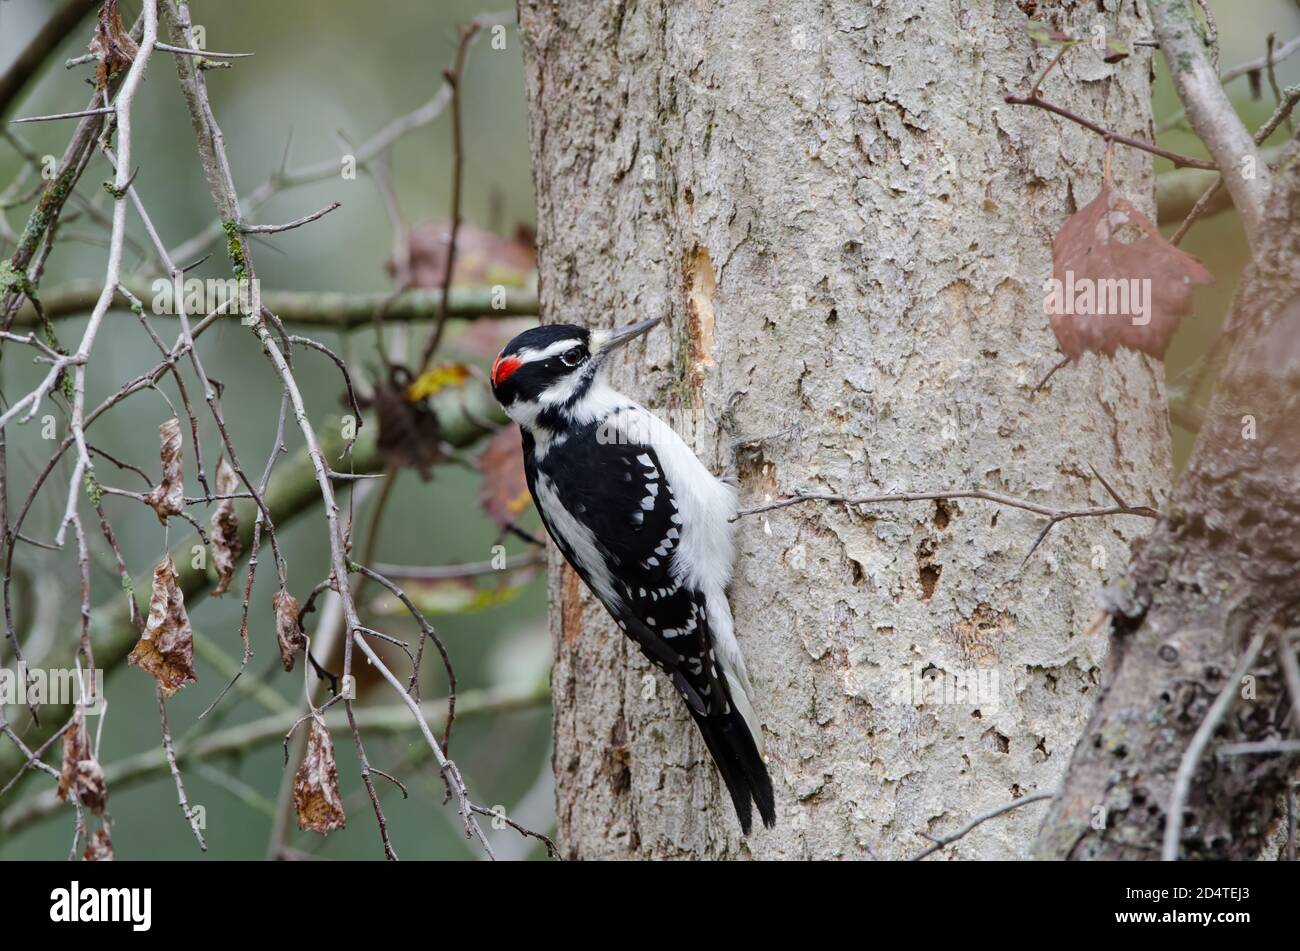 A male Hairy Woodpecker (Dryobates villosus) pecking a tree in search of insects to eat Stock Photo